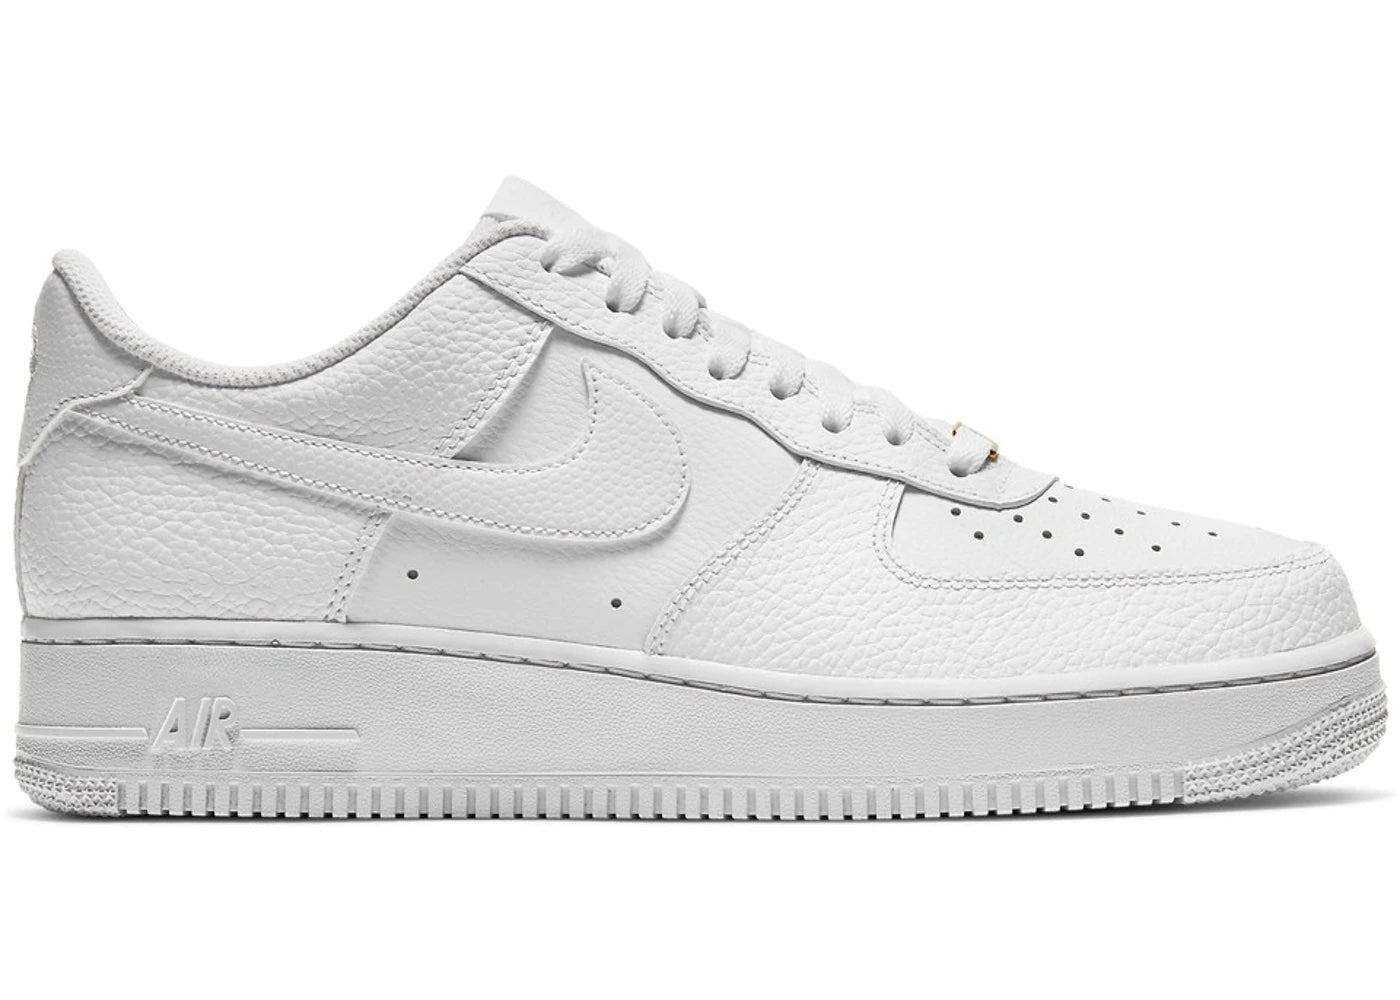 Nike Air Force 1 Low White Tumbled Leather - Sneakersbe Sneakers Sale Online